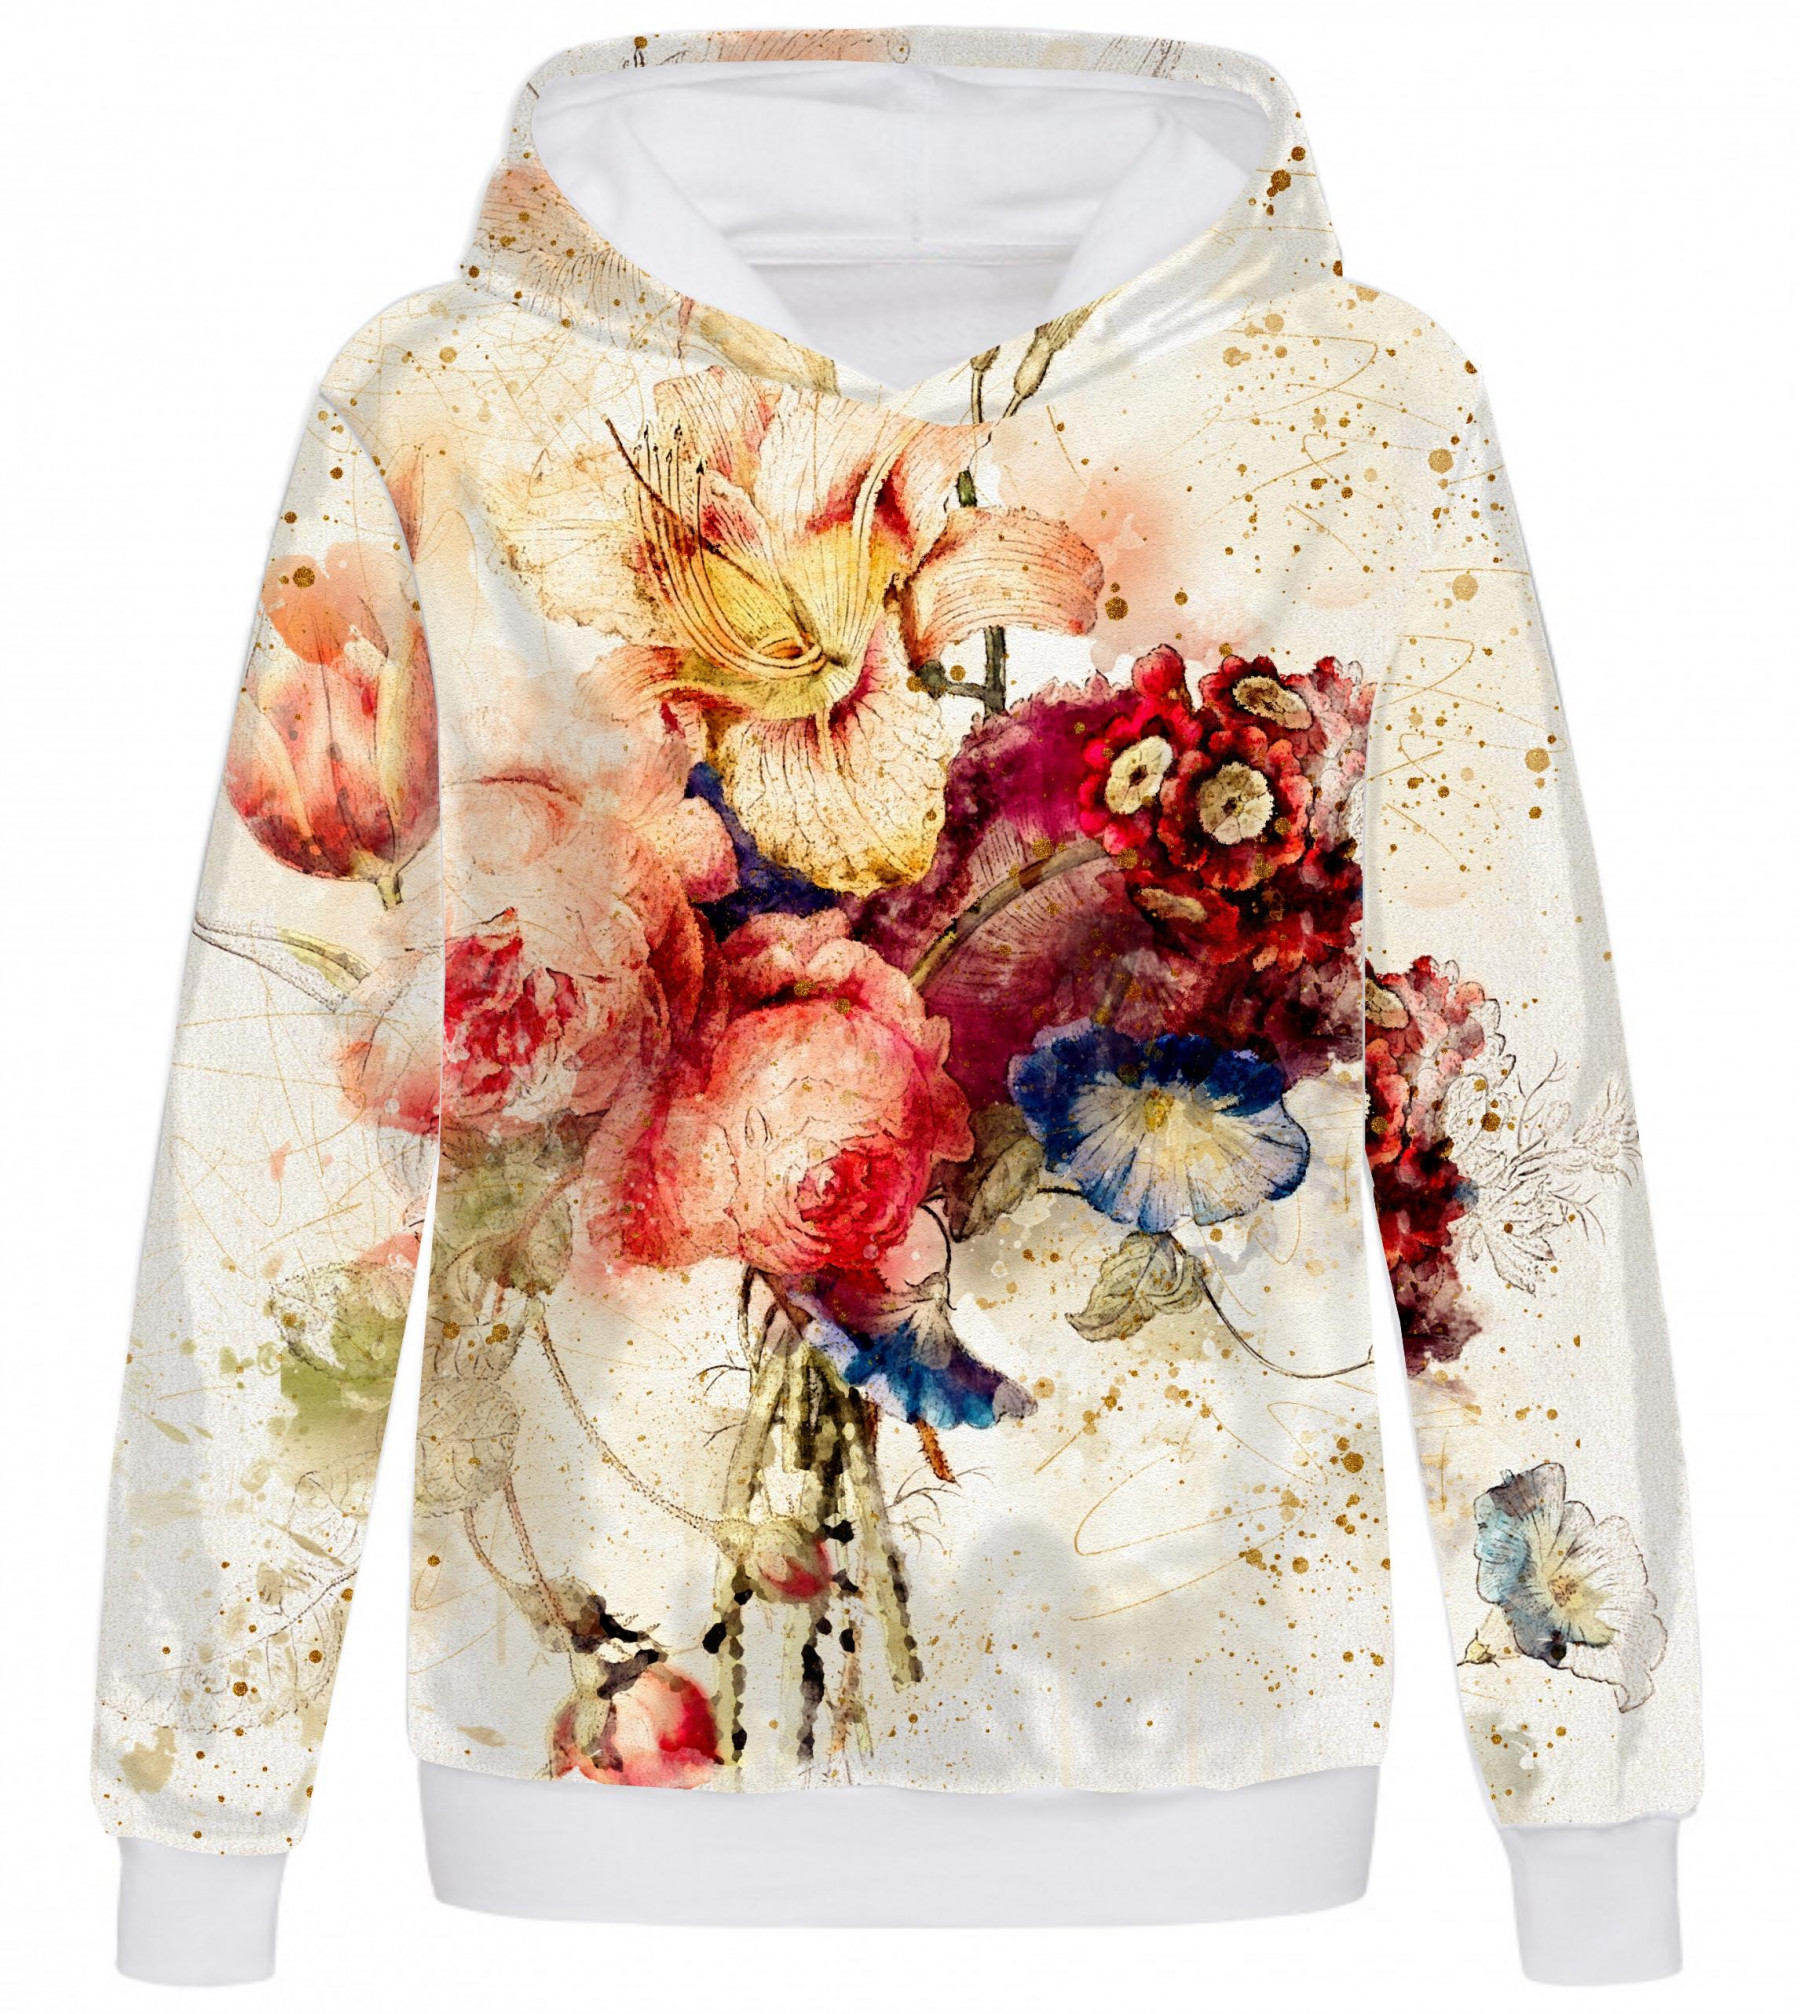 CLASSIC WOMEN’S HOODIE (POLA) - WATERCOLOR FLOWERS Pat. 5 - looped knit fabric 